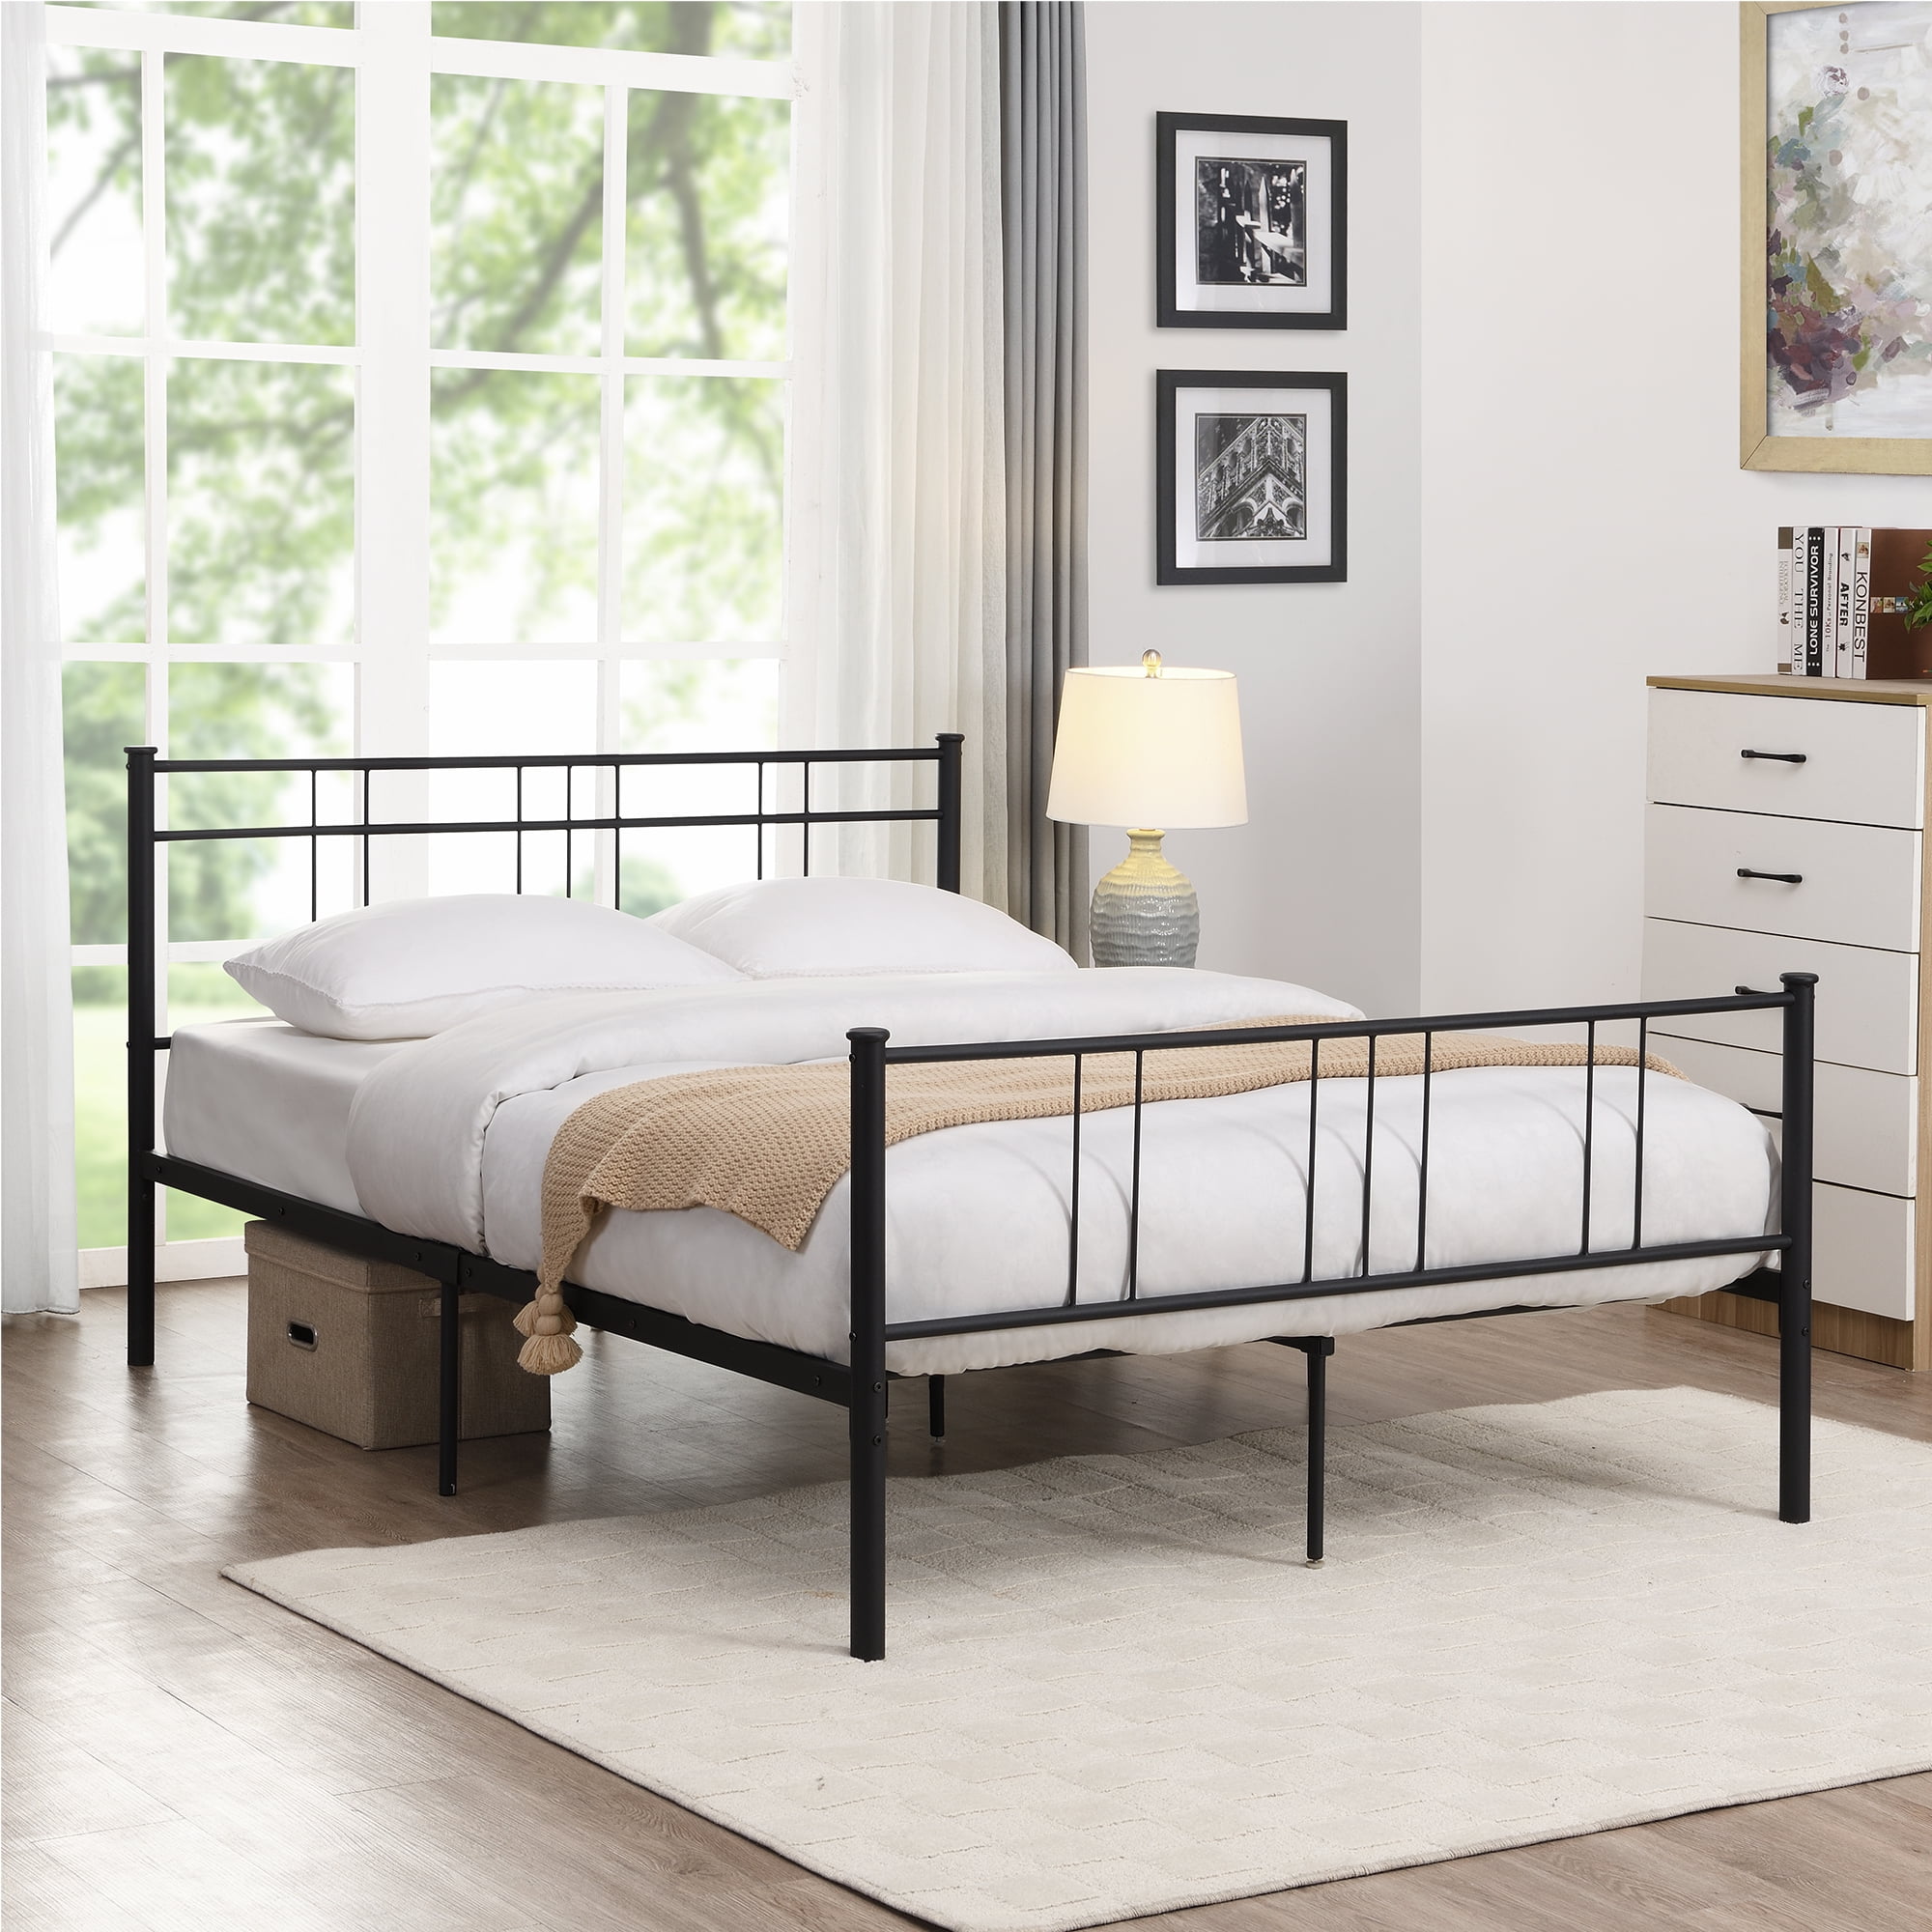 Metal Bed Frame With Headboard, Bed Frame Designs Free